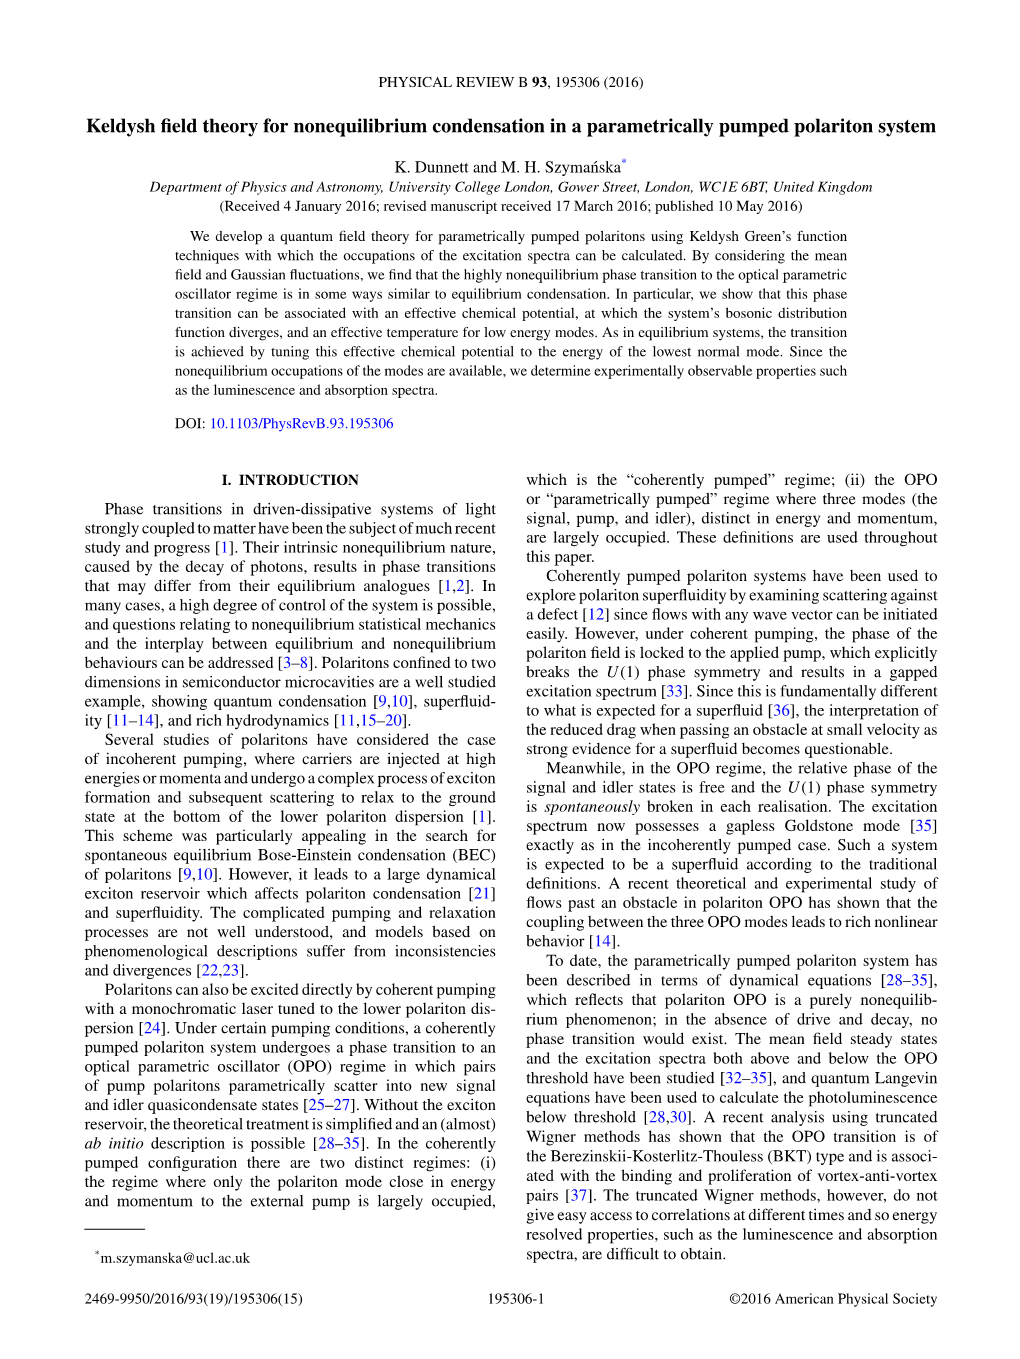 Keldysh Field Theory for Nonequilibrium Condensation in a Parametrically